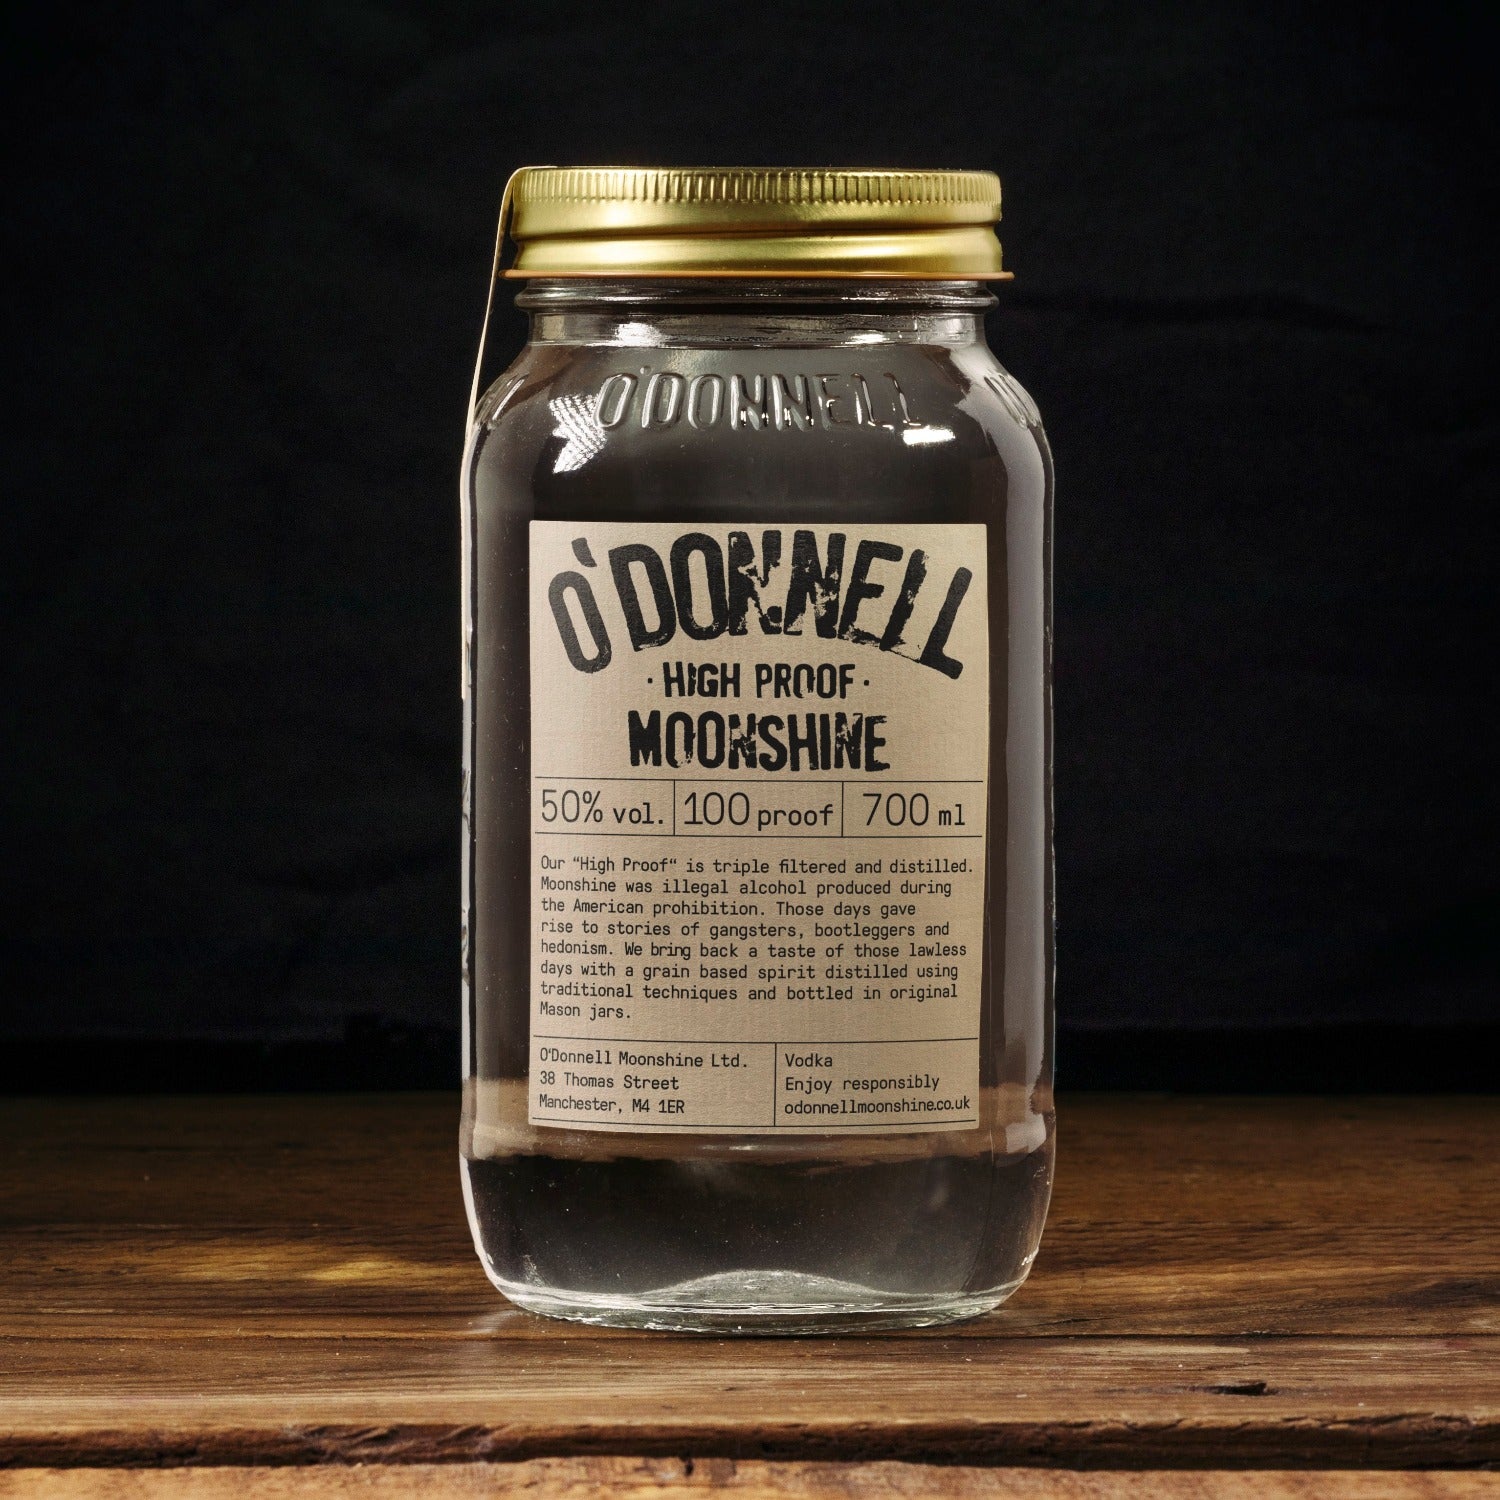 O Donnell Moonshine High Proof